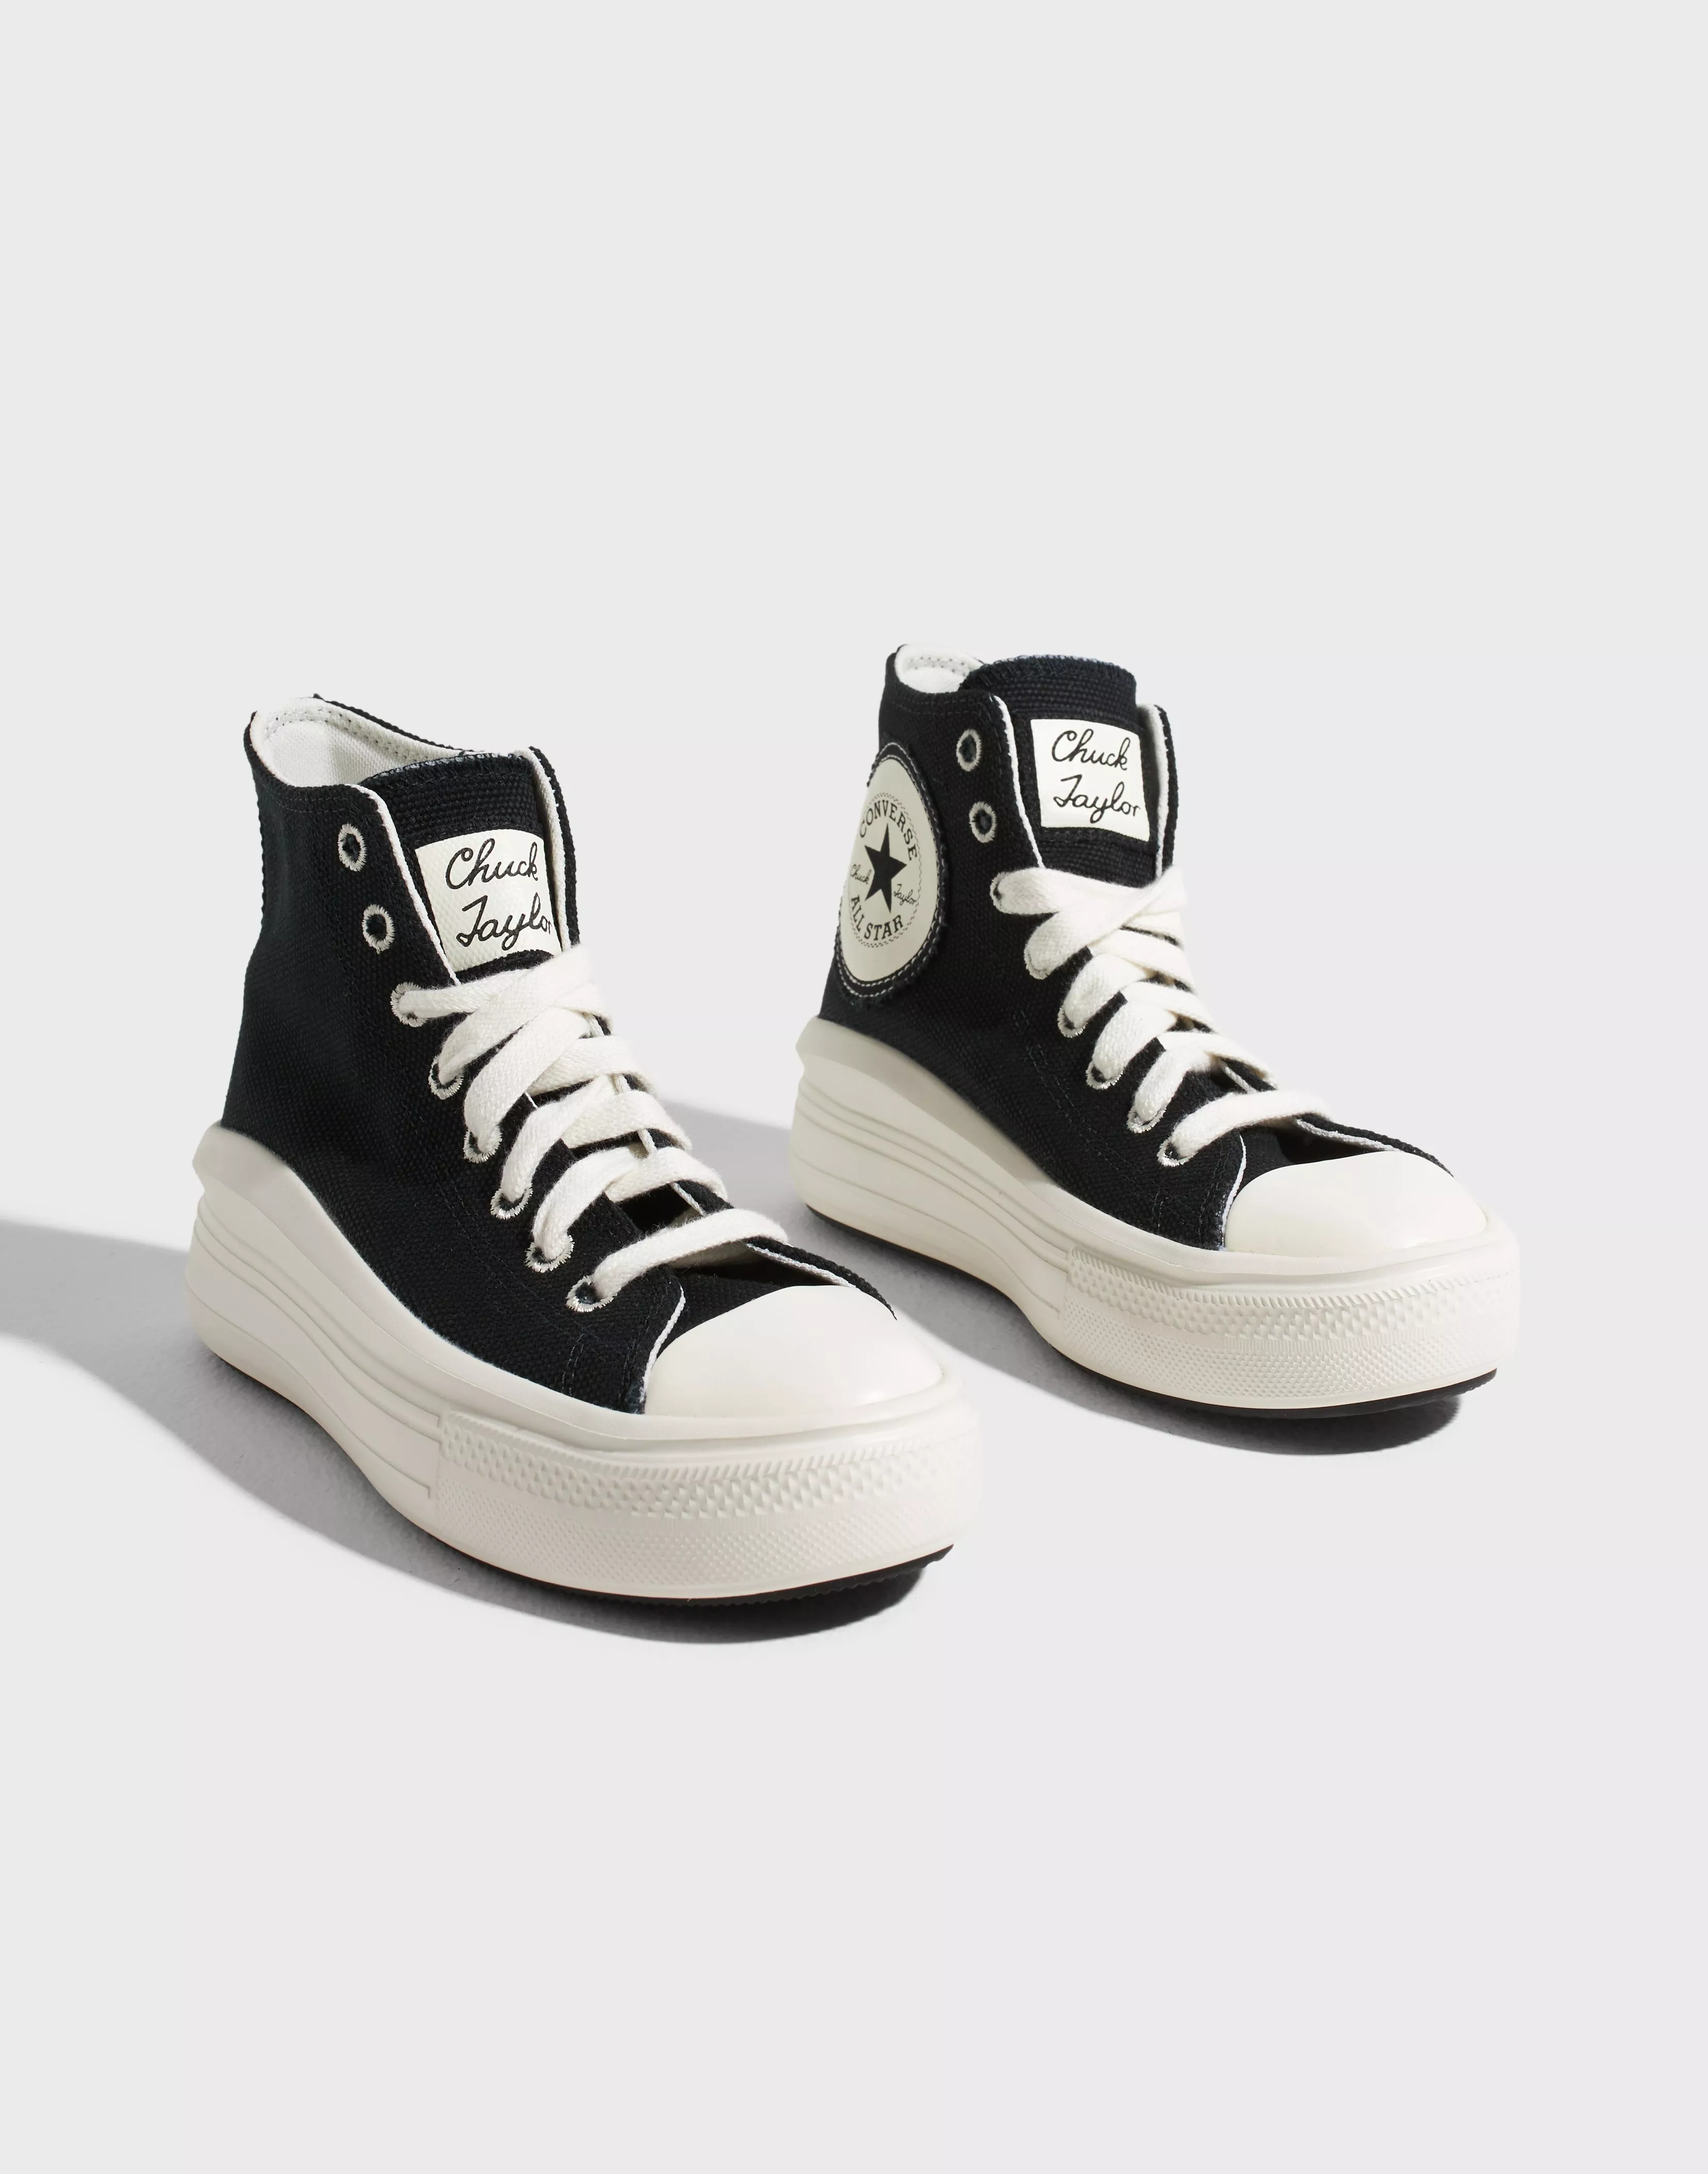 Fruity spise erstatte Buy Converse Chuck Taylor All Star Move - Black | Nelly.com